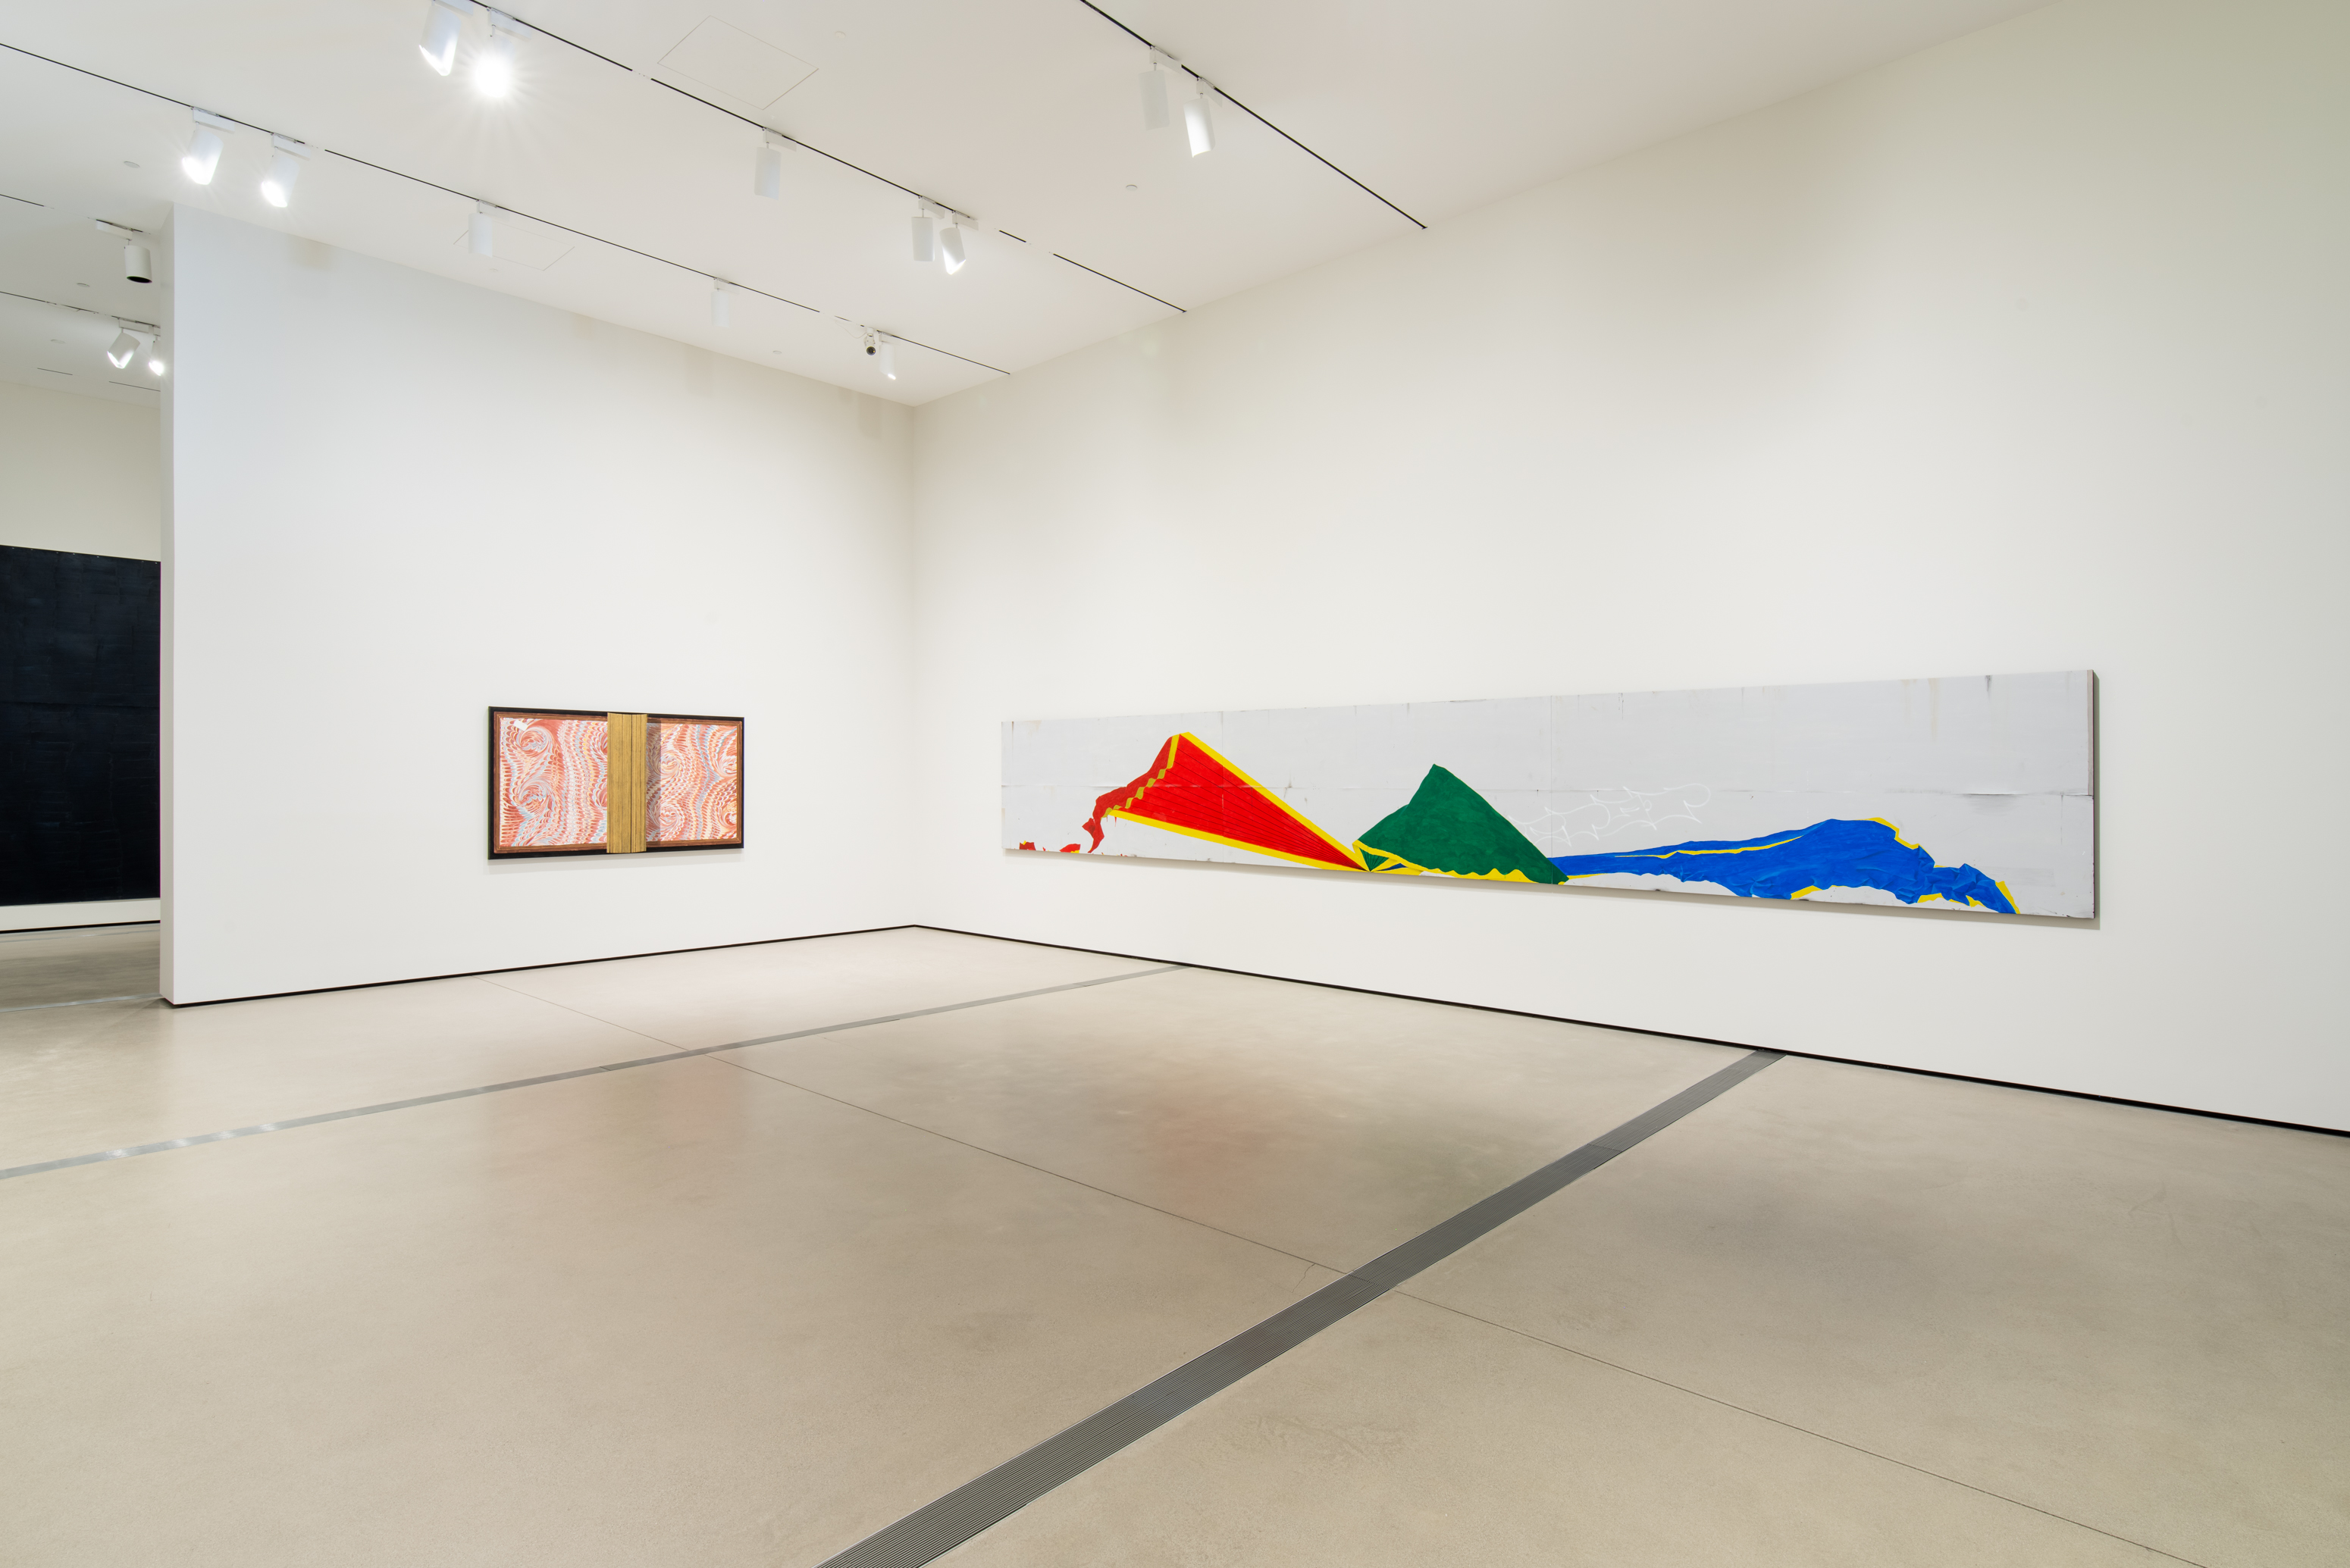 Installation view courtesy of the Broad